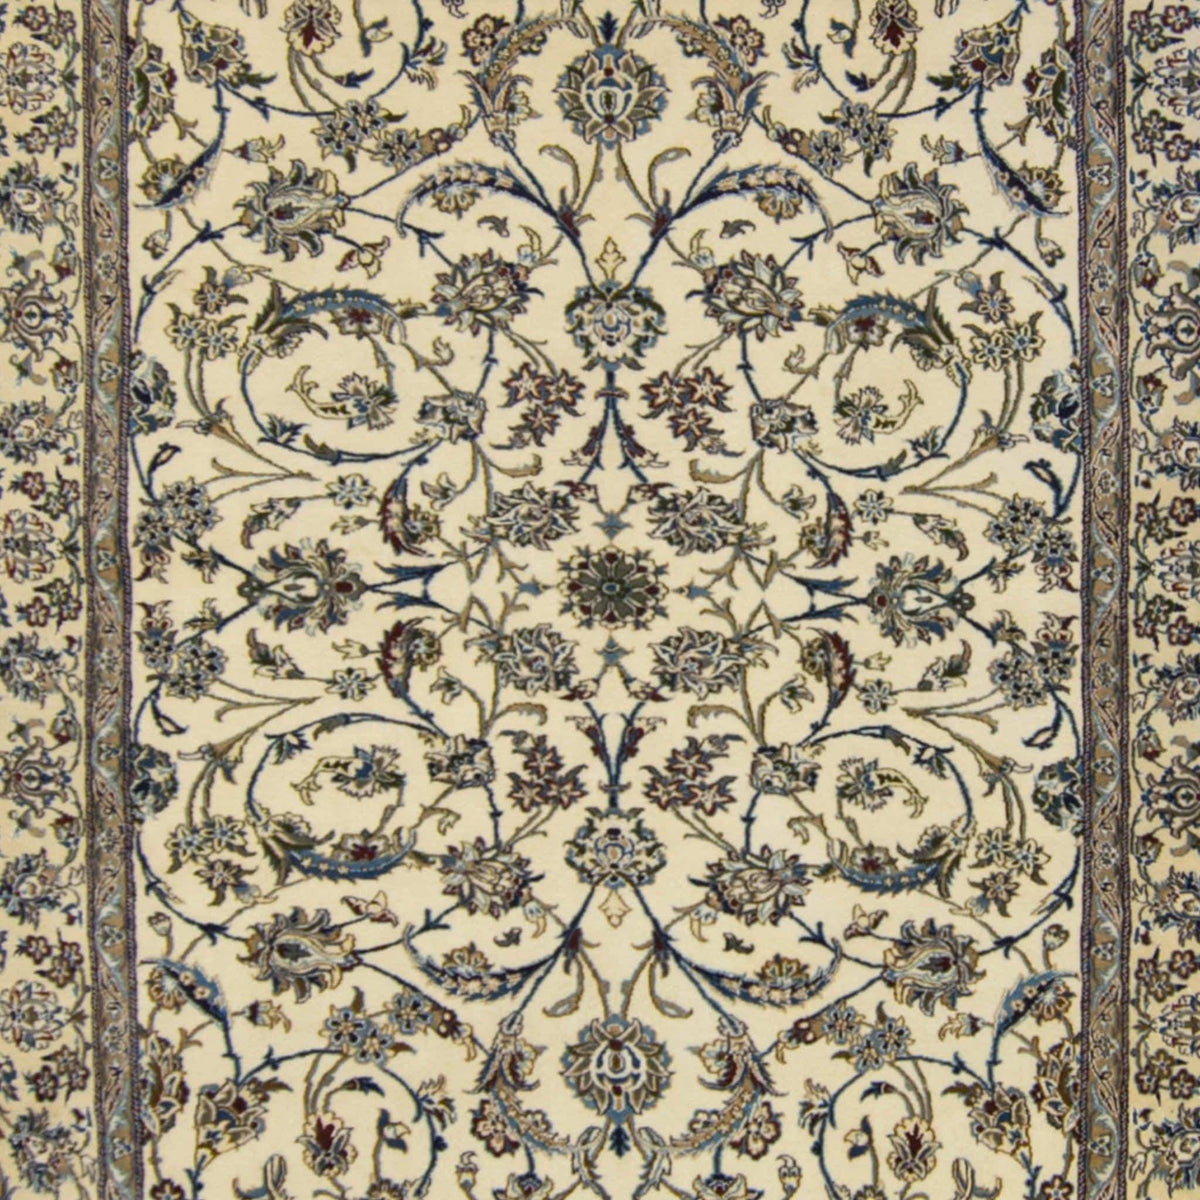 Authentic Fine Persian Hand-knotted Wool and Silk 9LAA Nain Rug 249cm x 345cm